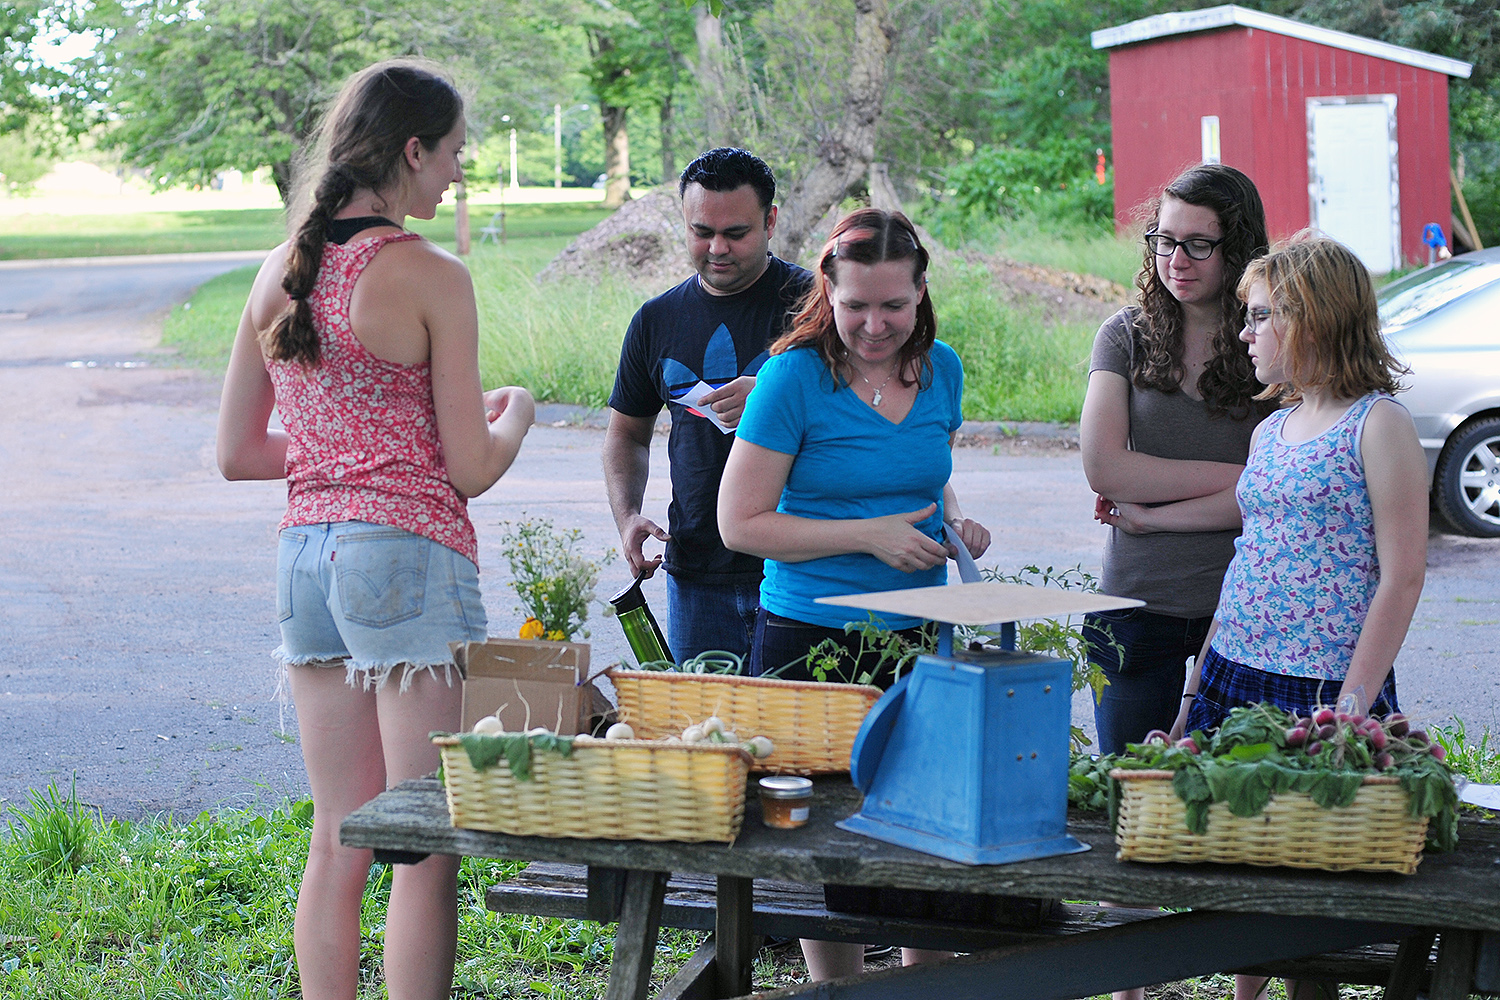 Students tending Wesleyan's Long Lane Farm are now selling their produce at a weekly farmers' market.